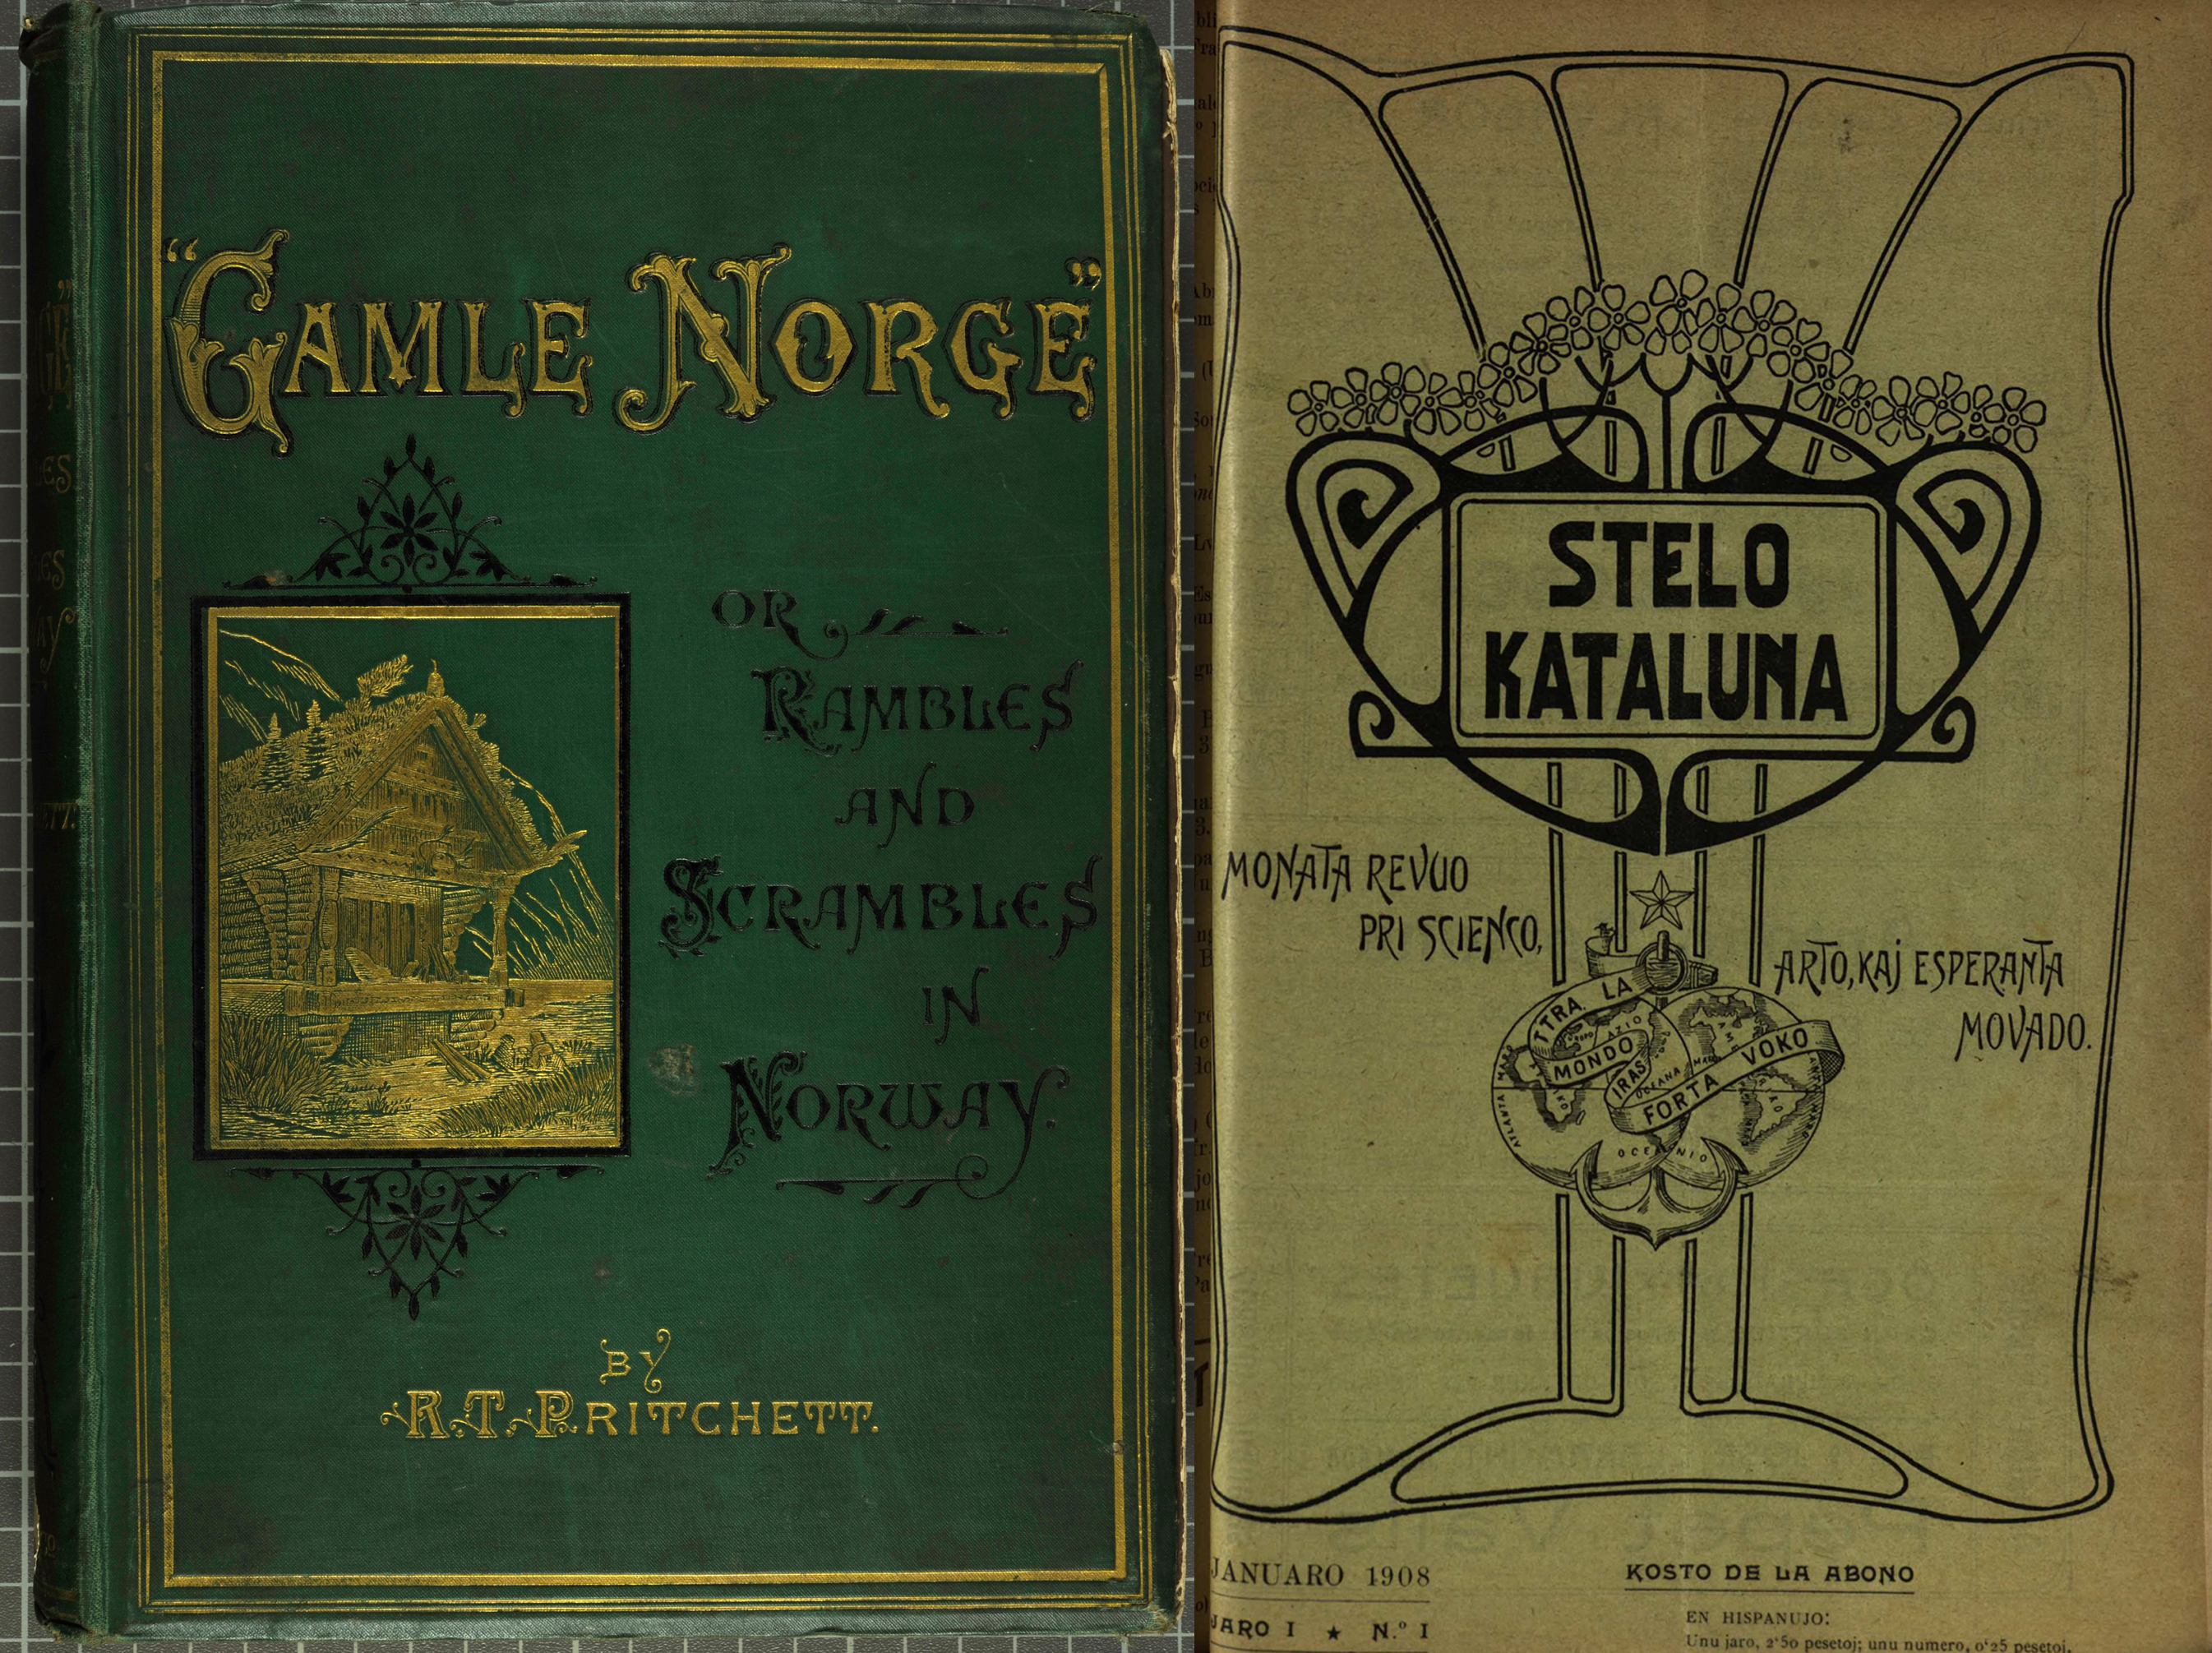 The cover of “Gamle Norge” Rambles and Scrambles in Norway, by Robert Taylor Pritchett, just one of the many works Beveridge owned on Norwegian travel. (left, Bev DL417.P8) and an example of an Esperanto magazine, Stelo Kataluna, with an Art Nouveau inspired cover. It is bound with 7 other titles. (right, Bev PM8201.S7C).